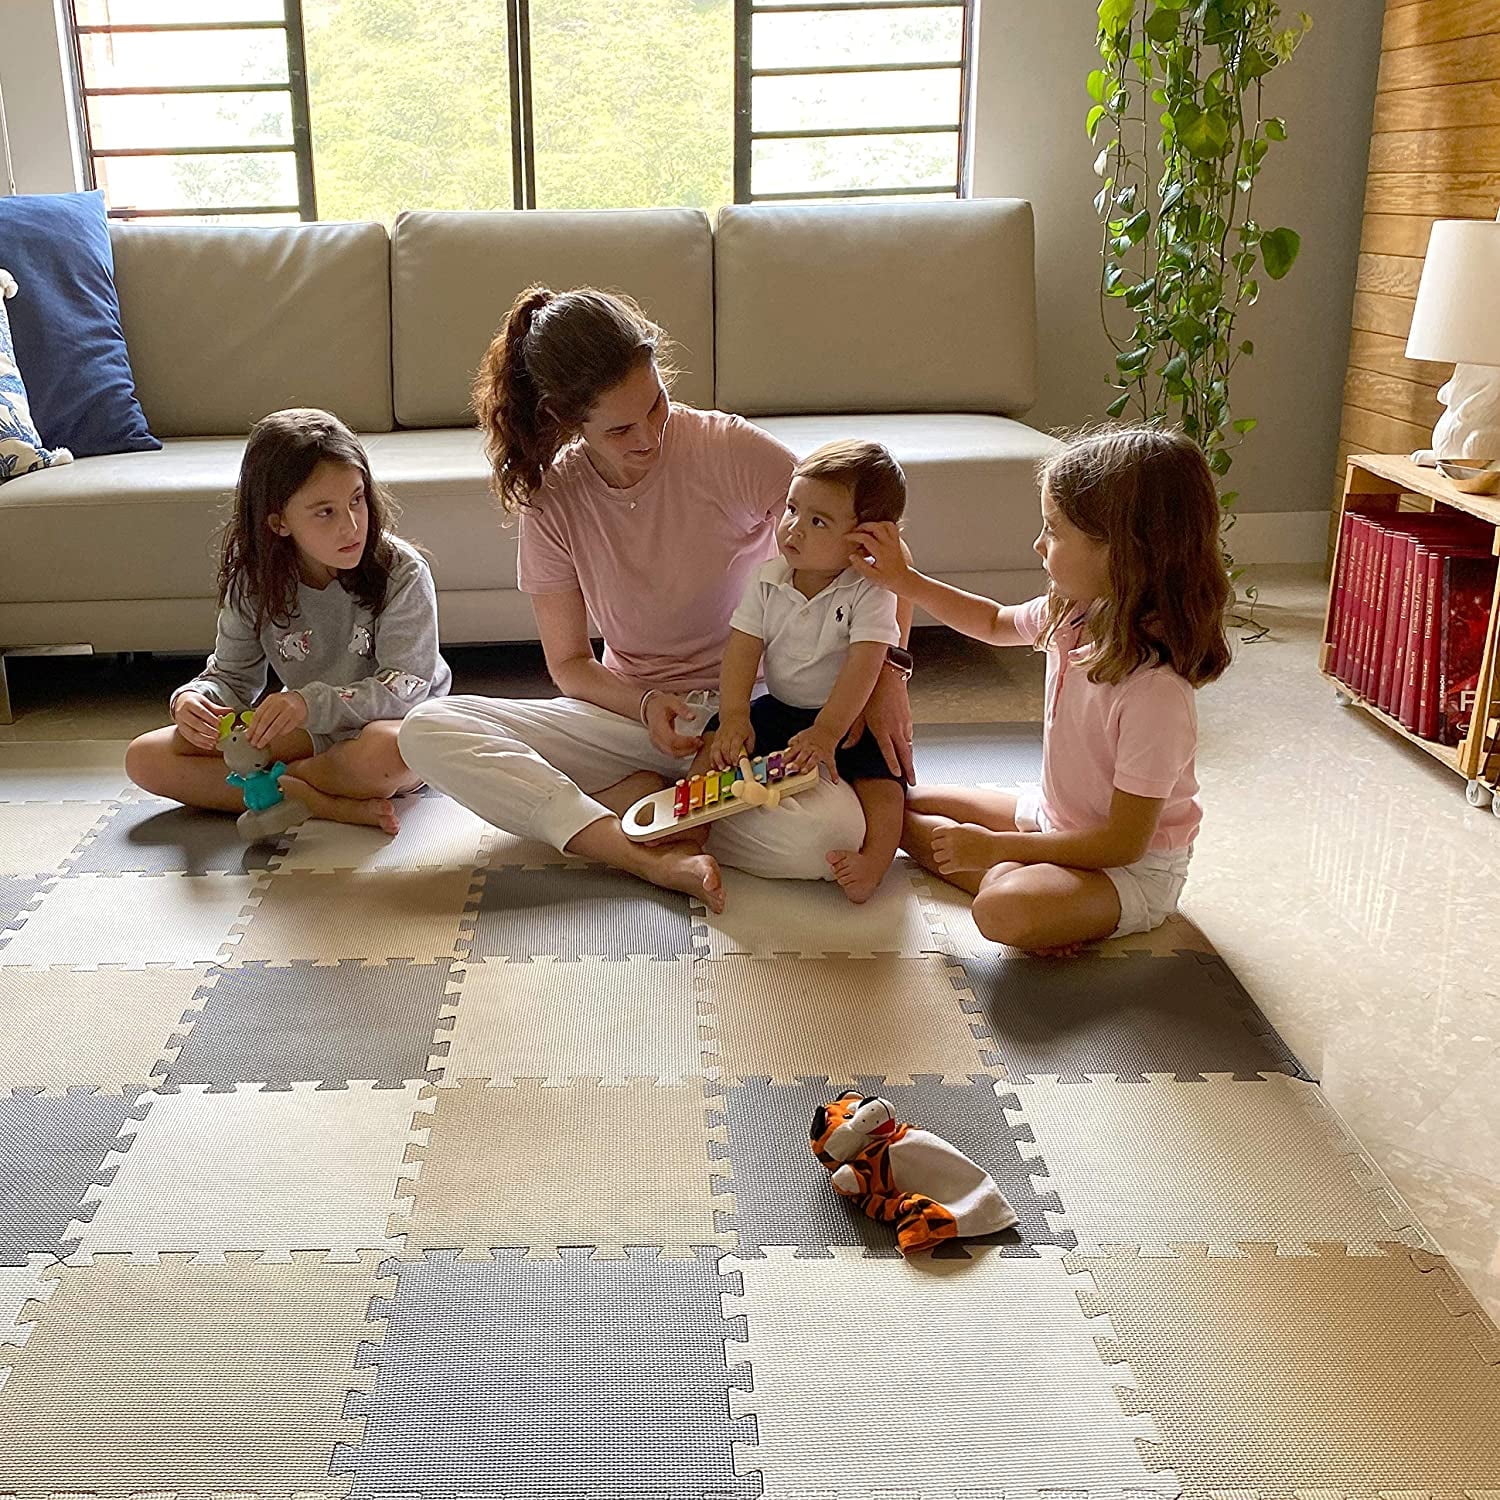 Baby Brielle Interlocking Hexagon Floor Foam Tile Activity Mat for Tummy Time, Crawling, and Playing Ultra Thickness Playmat